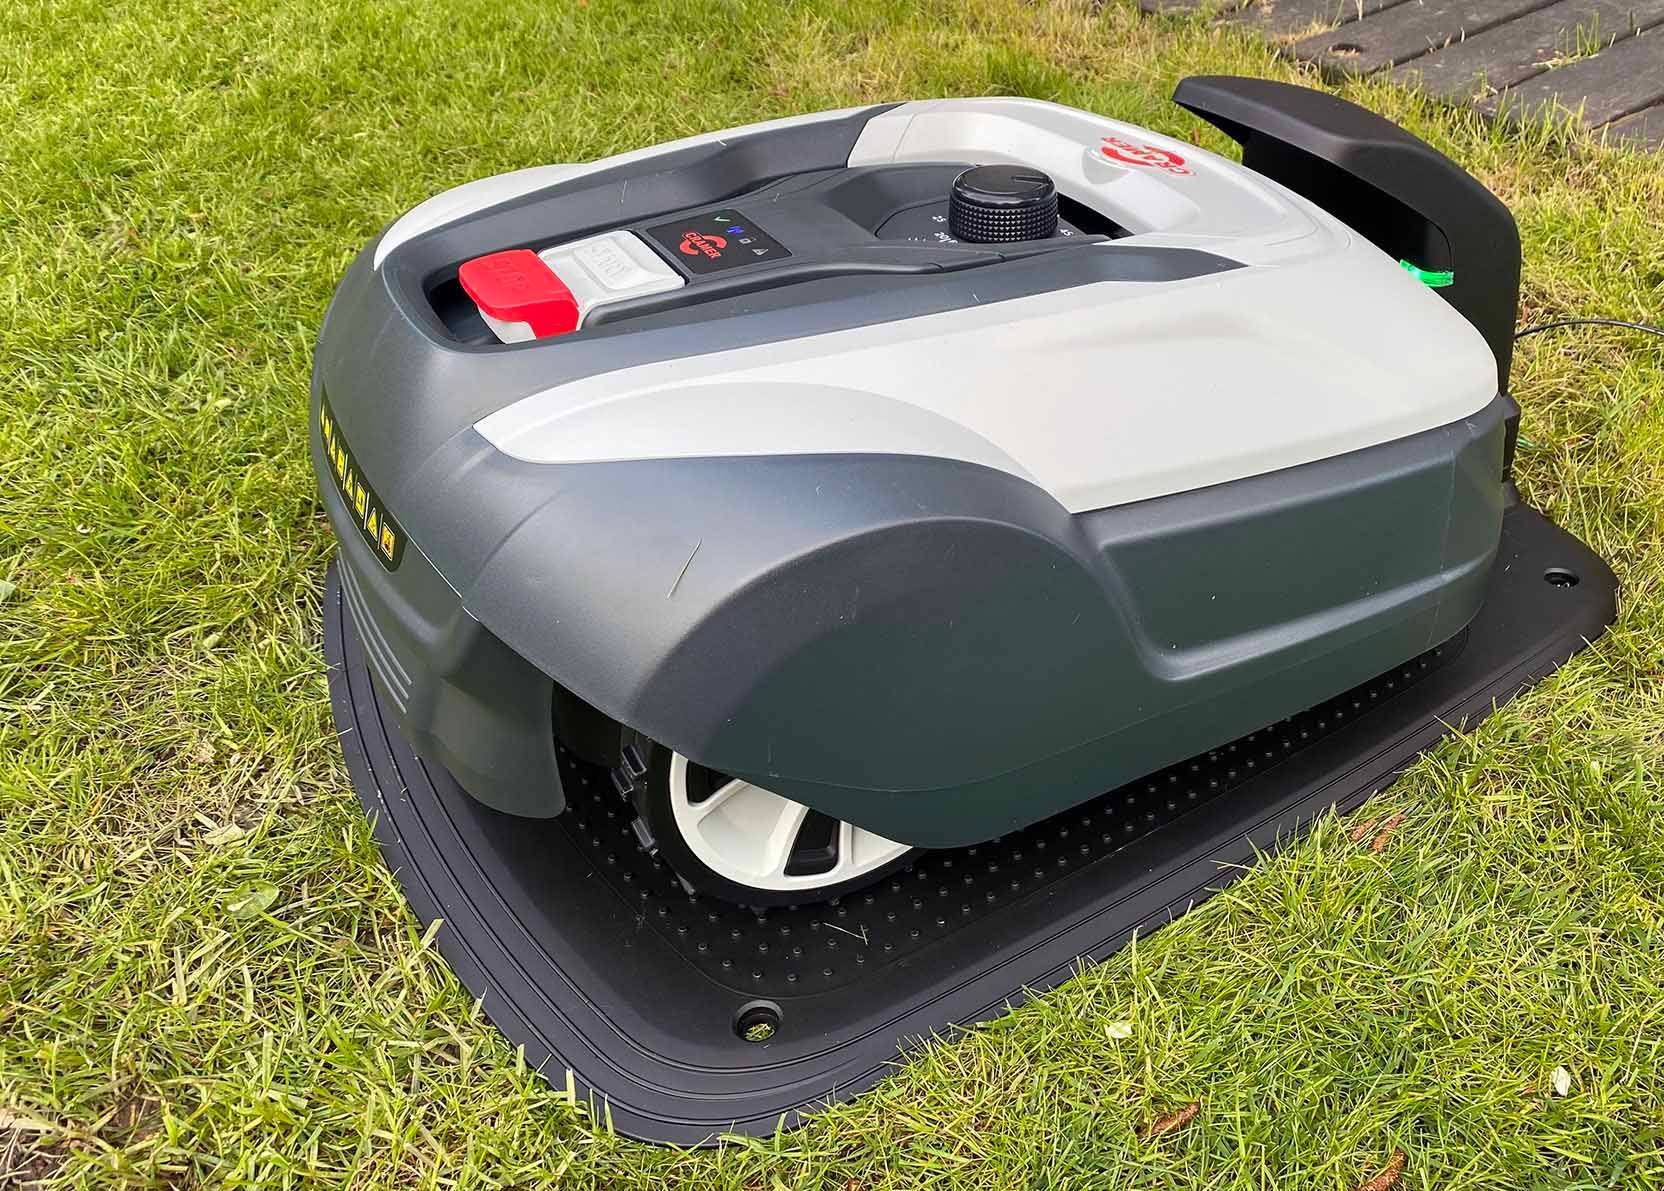 Top 17 Best Robotic lawn of 2022 Reviewed Ranked